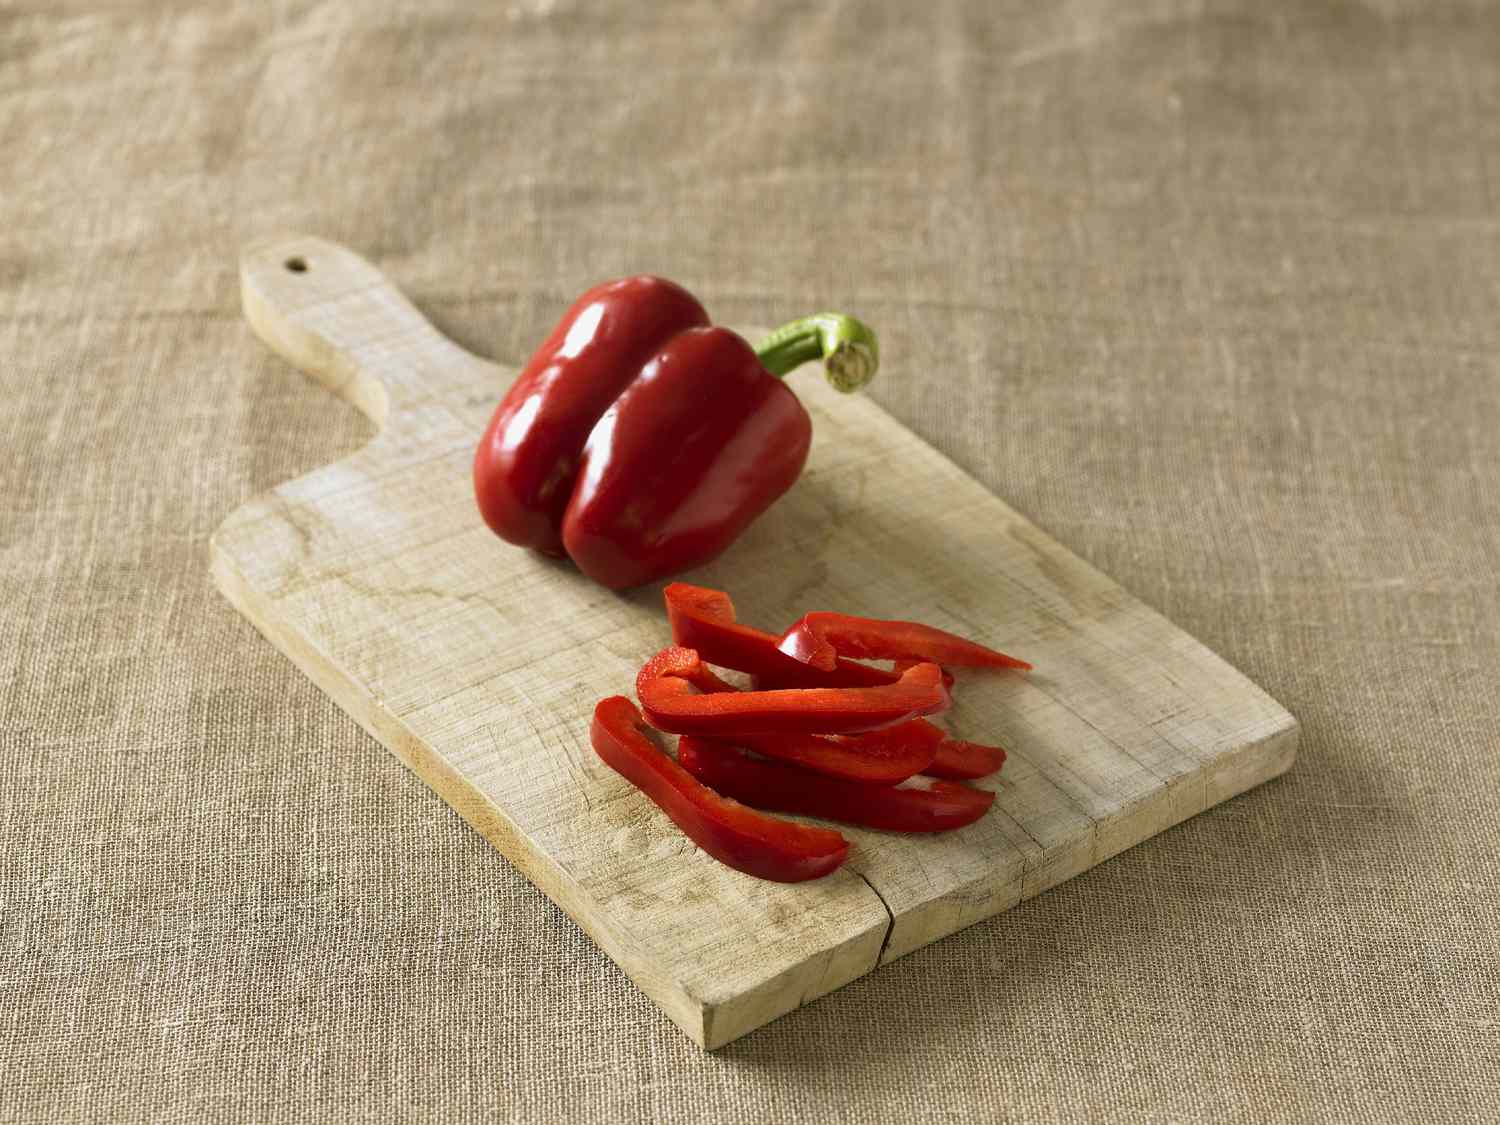 How To Store A Cut Bell Pepper